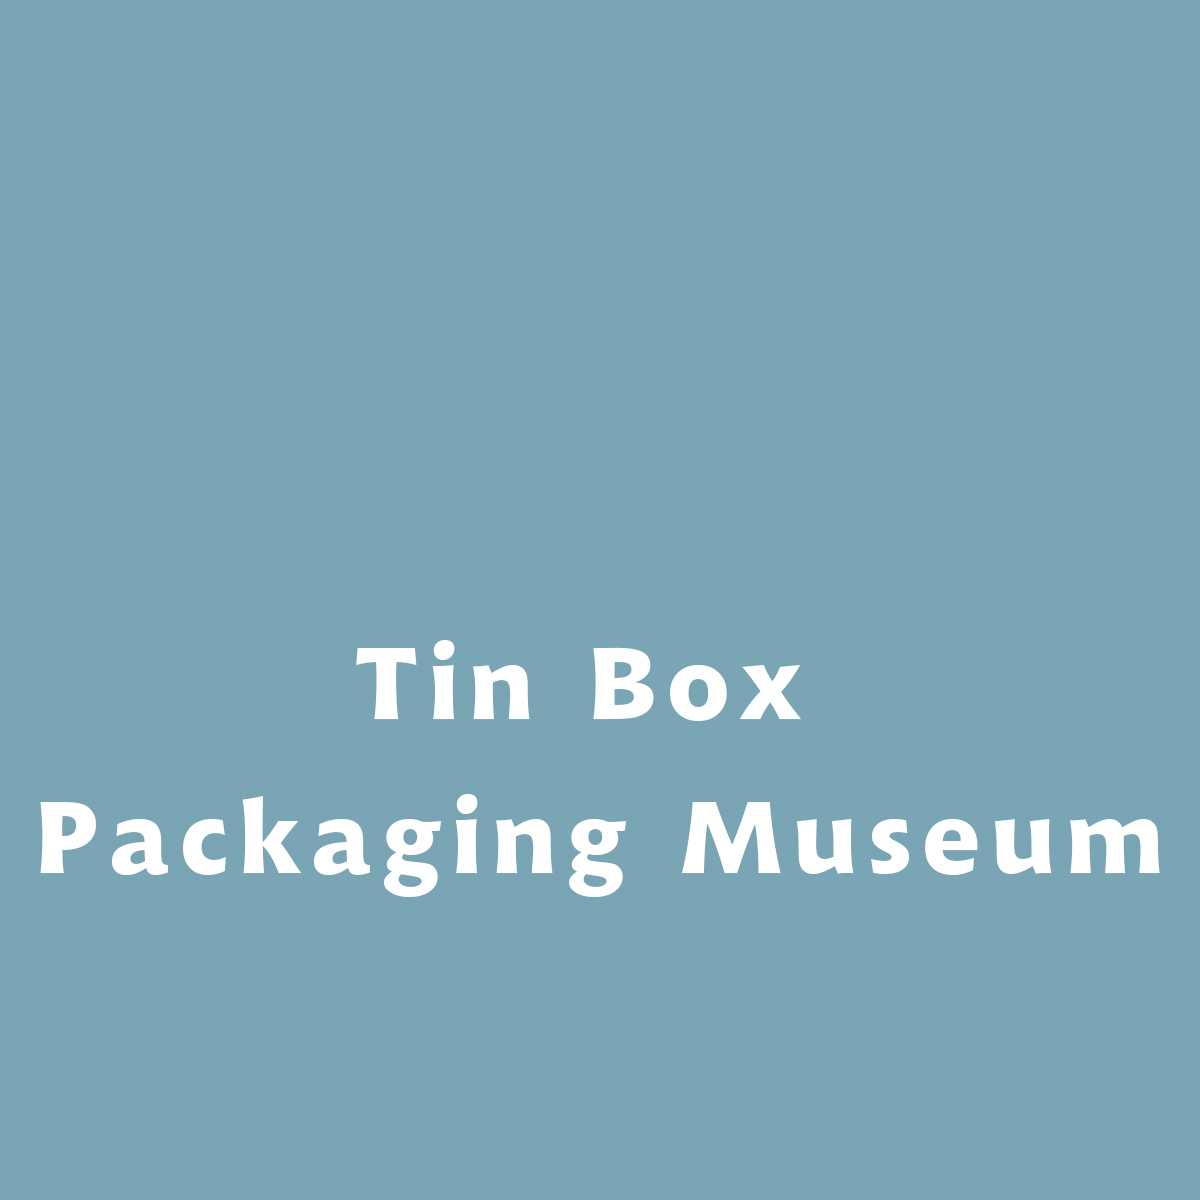 I-Tin Box Packaging Museum